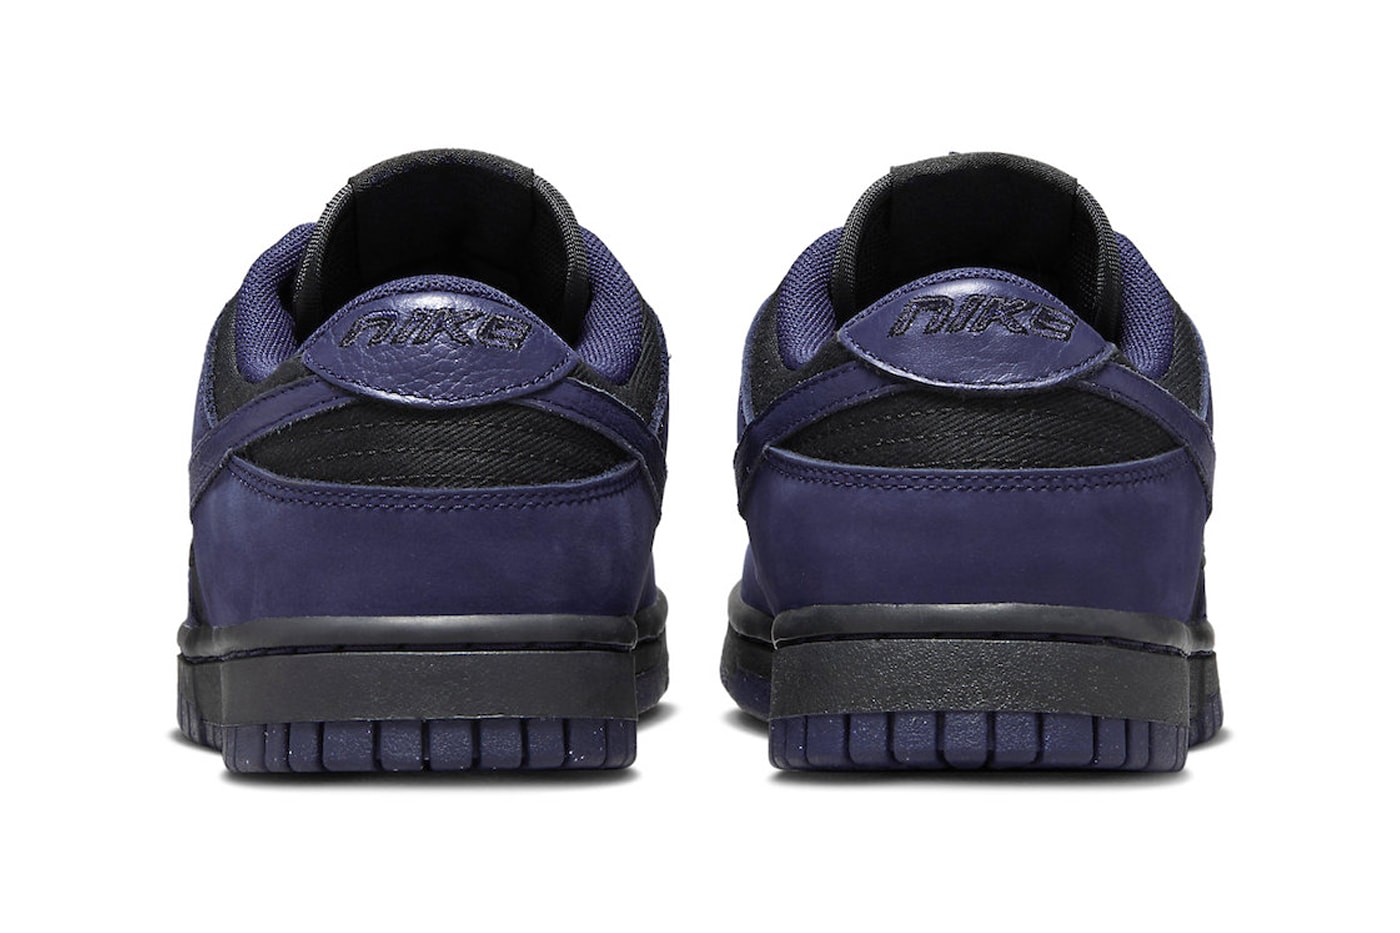 Official Look at the Nike Dunk Low in "Purple Ink" FB7720-001 womens canvas suede dark ominous speckled swoosh